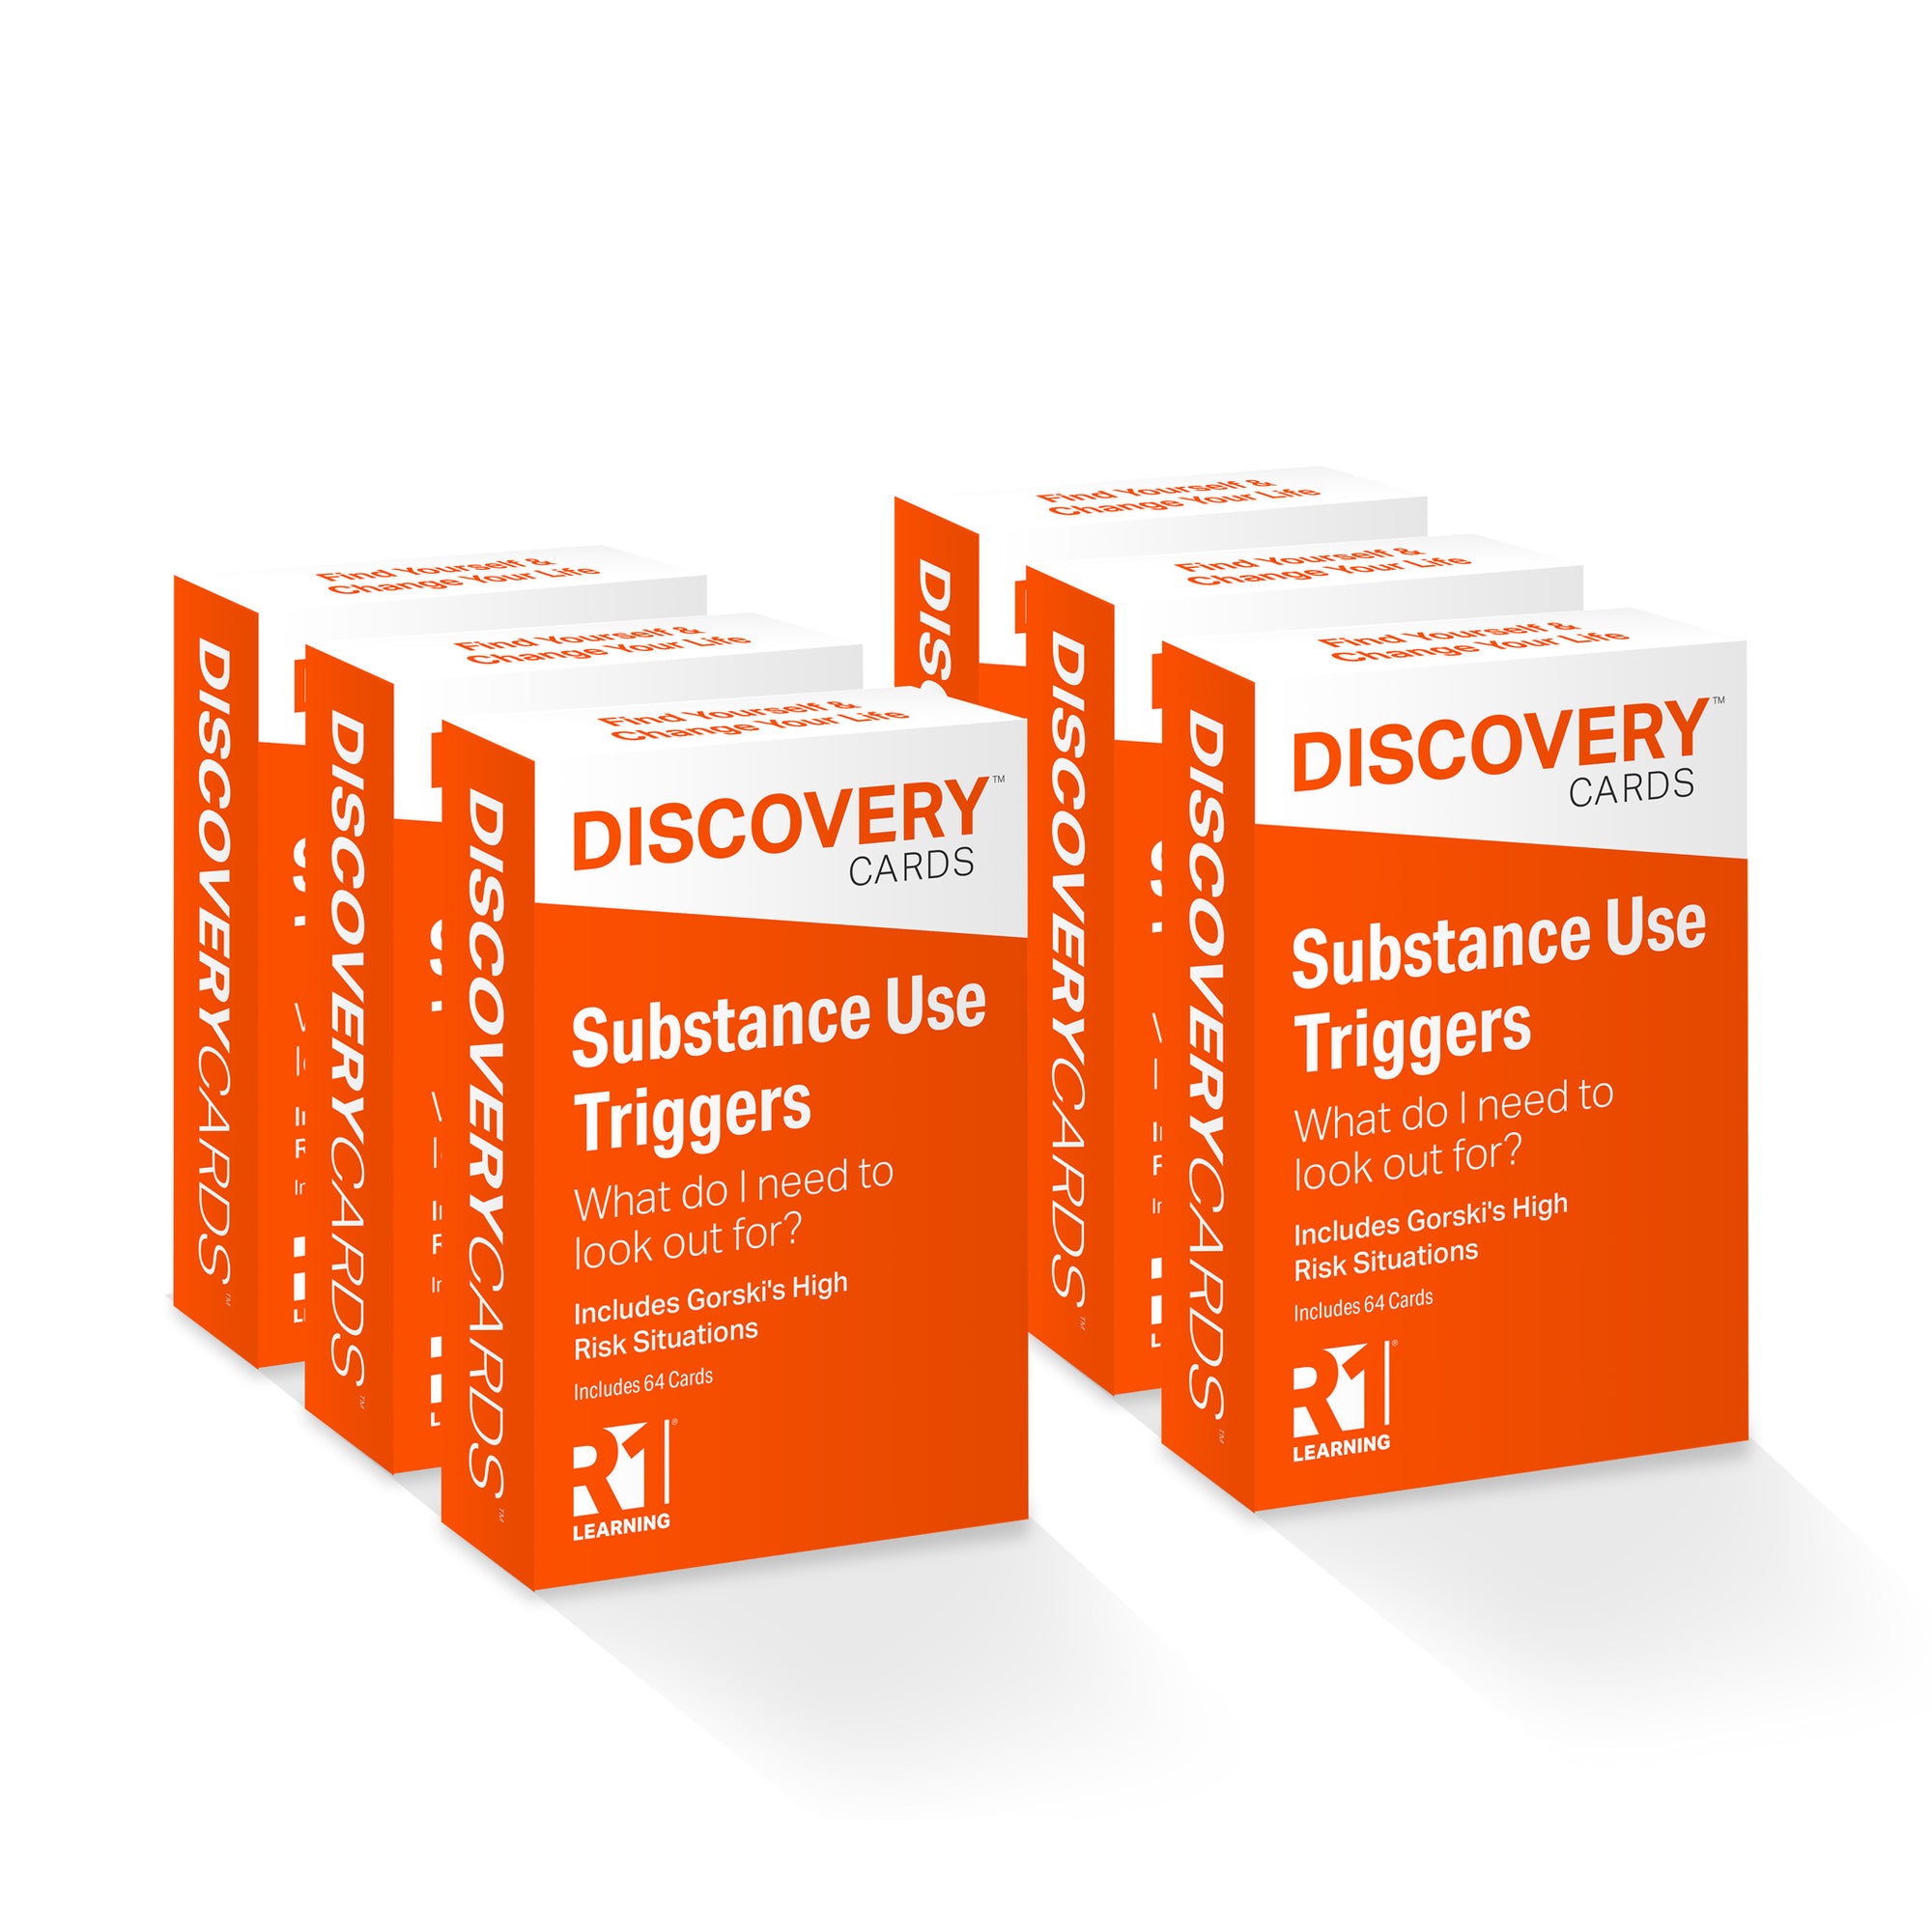 Substance Use (Relapse) Triggers Discovery Cards Value Pack — 6 decks